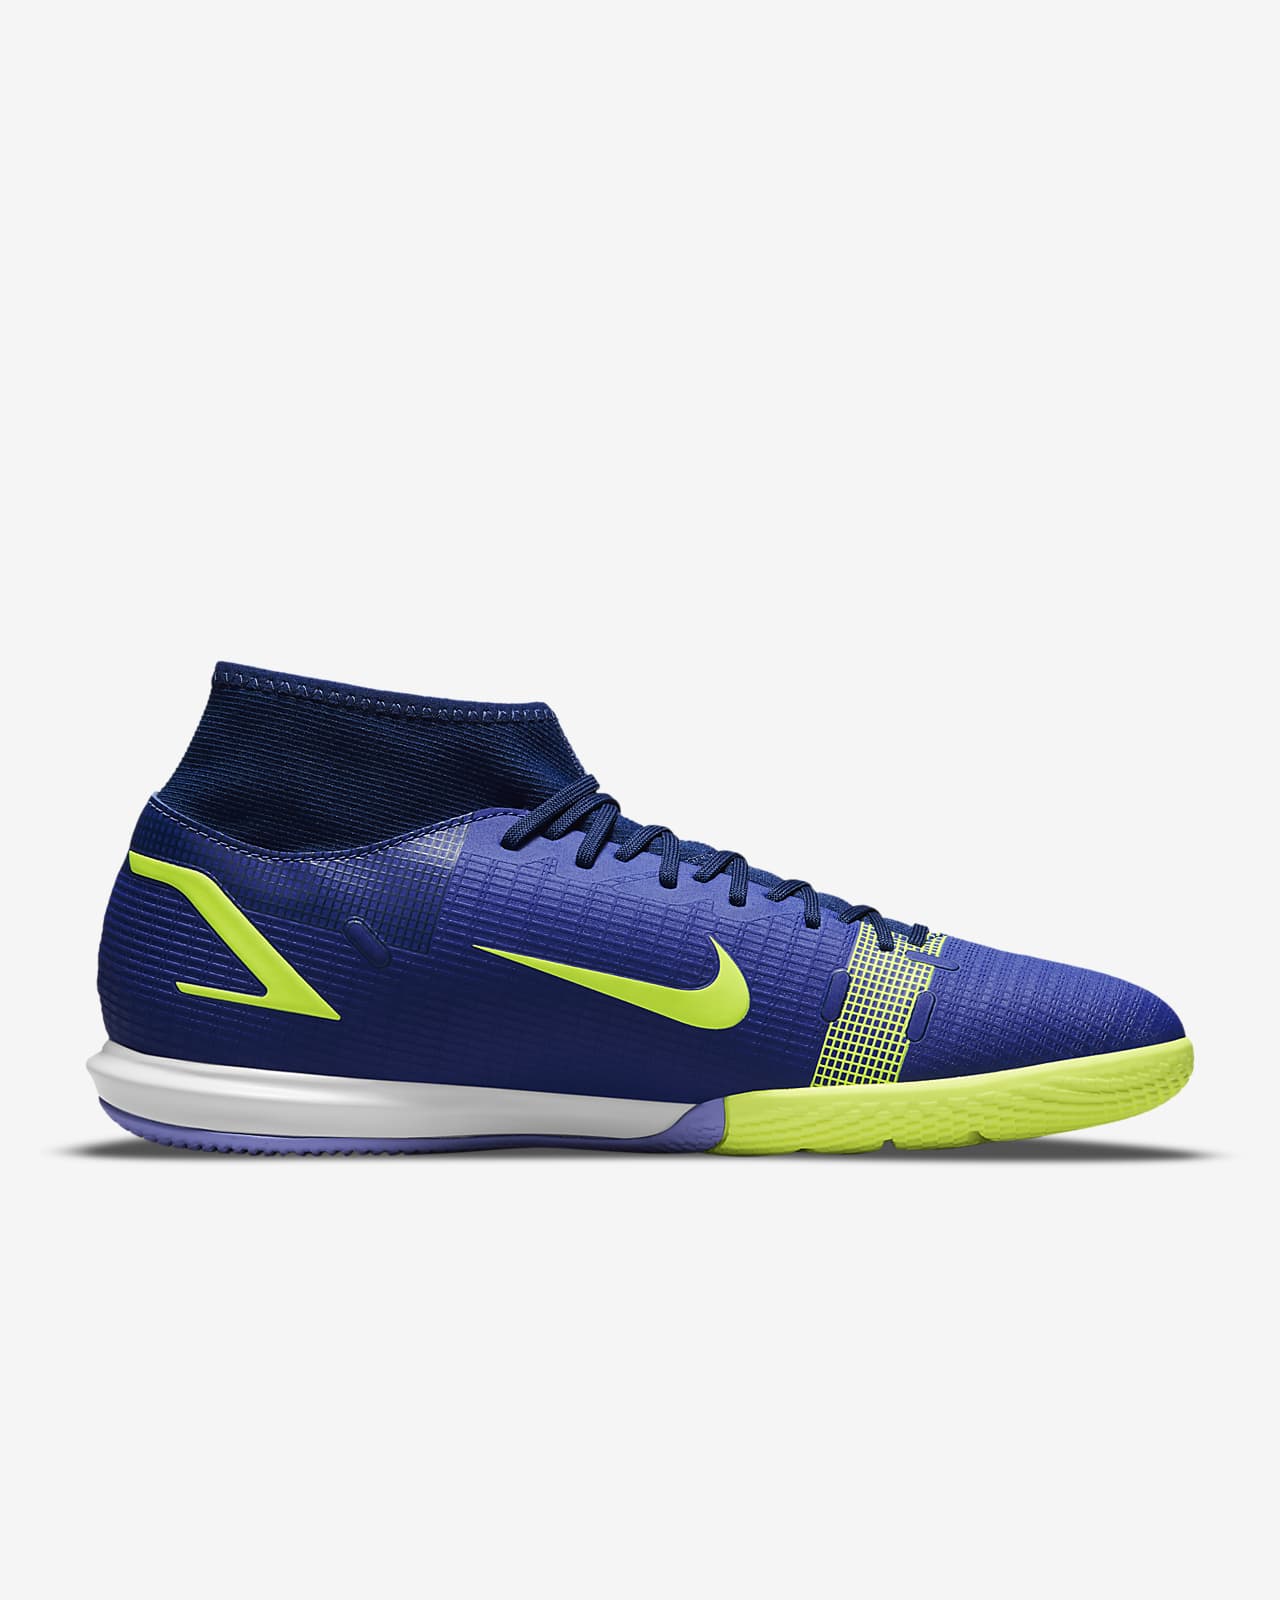 nike flyknit indoor soccer shoes